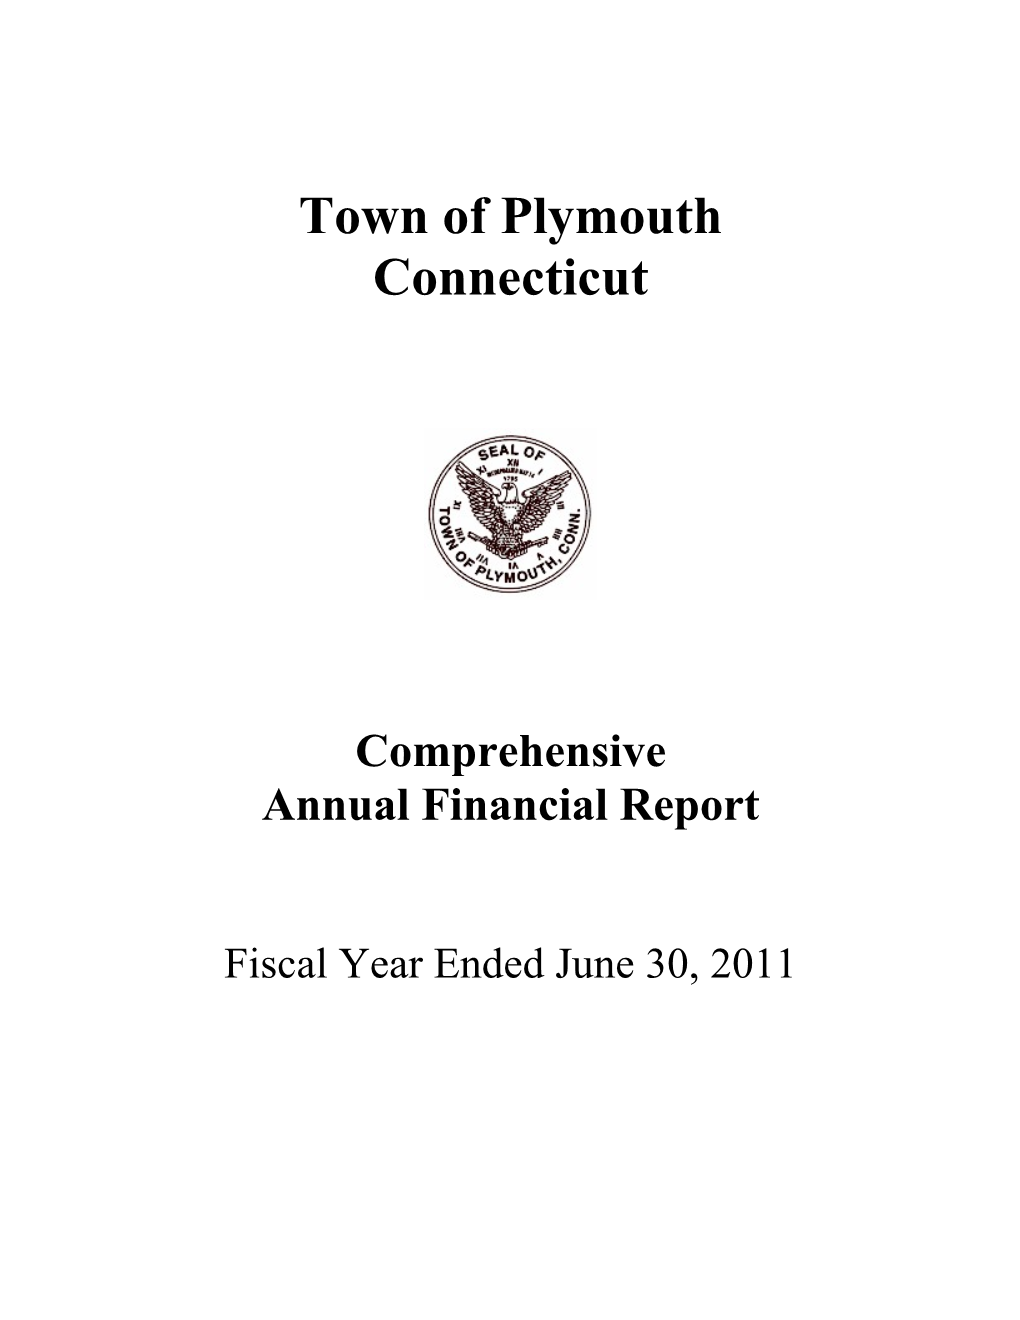 Town of Plymouth Connecticut